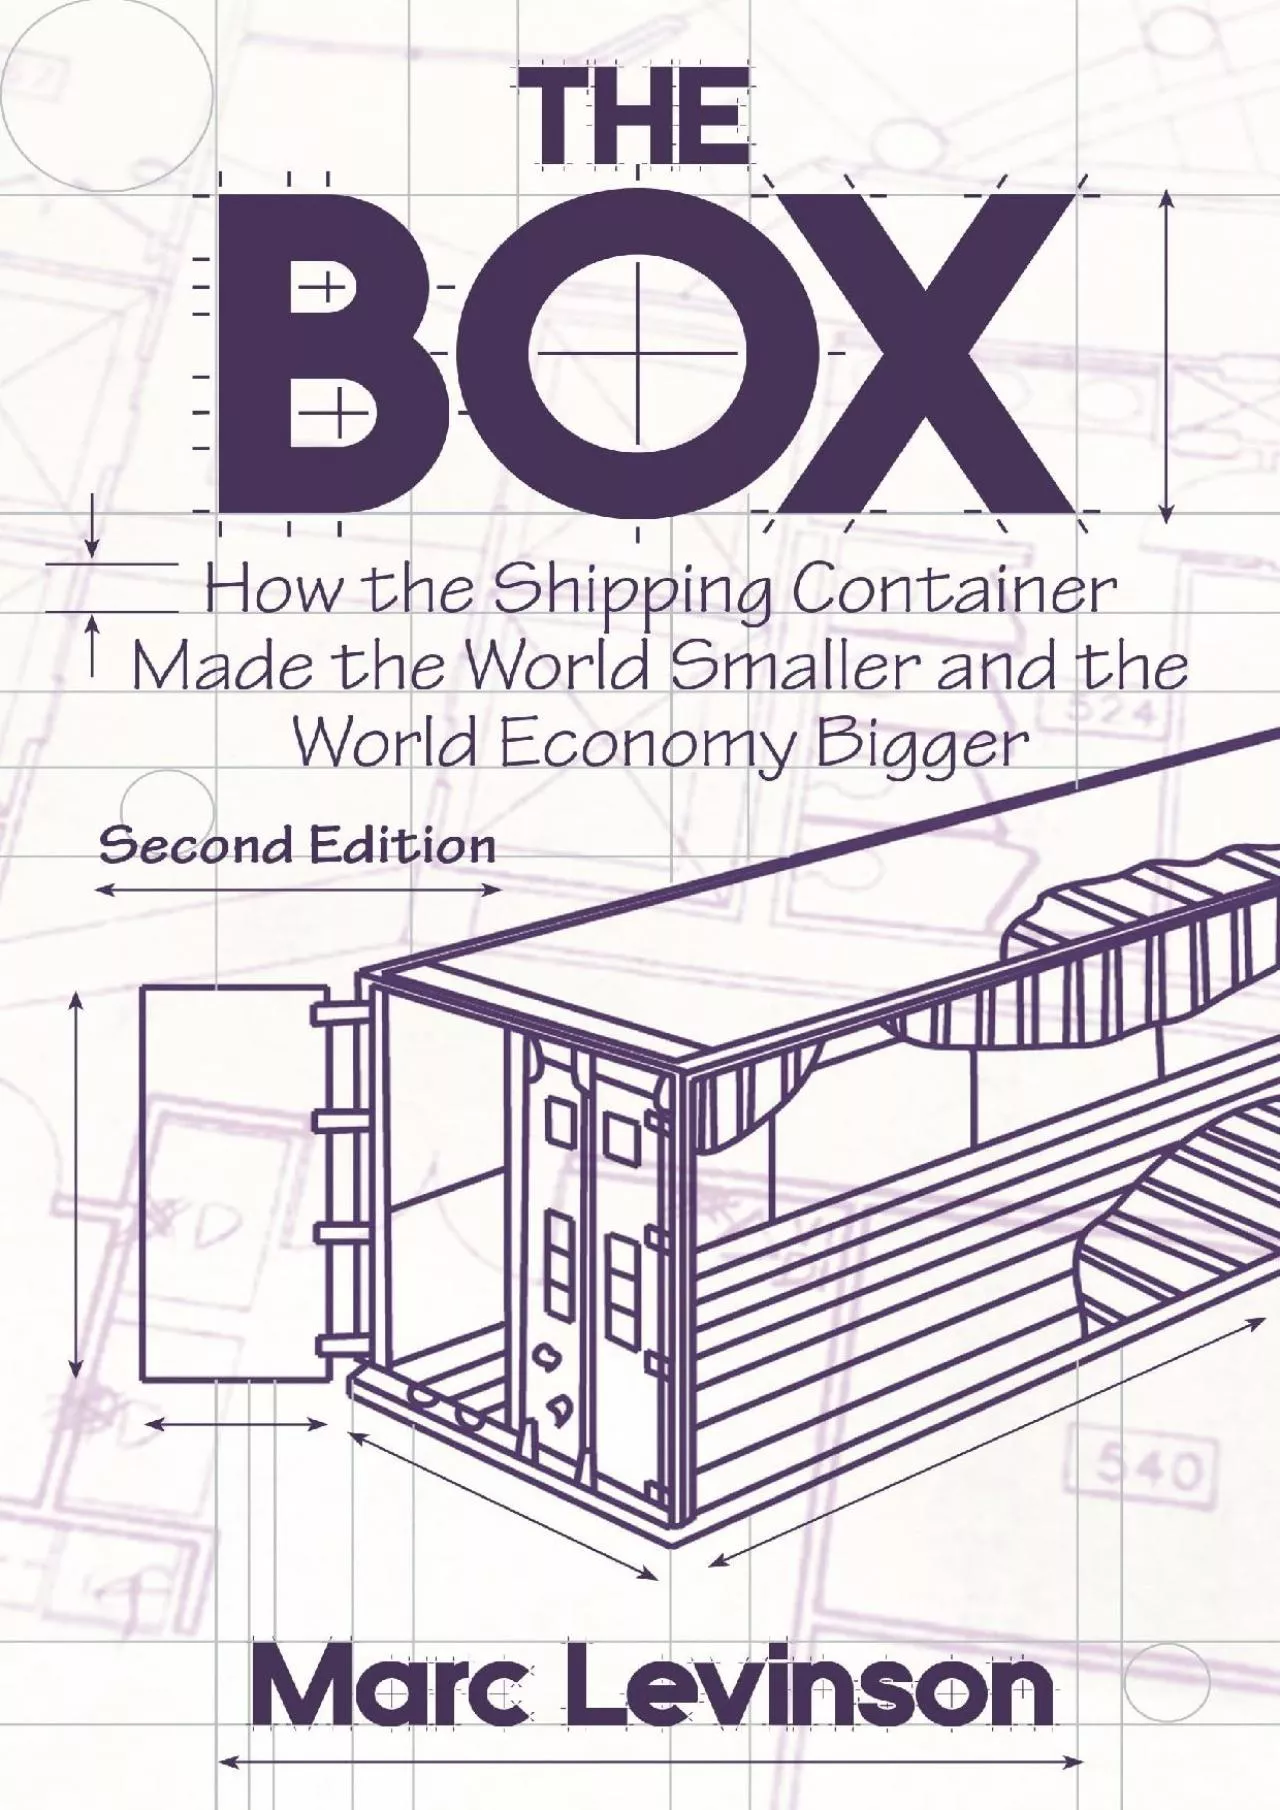 [EBOOK]-The Box: How the Shipping Container Made the World Smaller and the World Economy